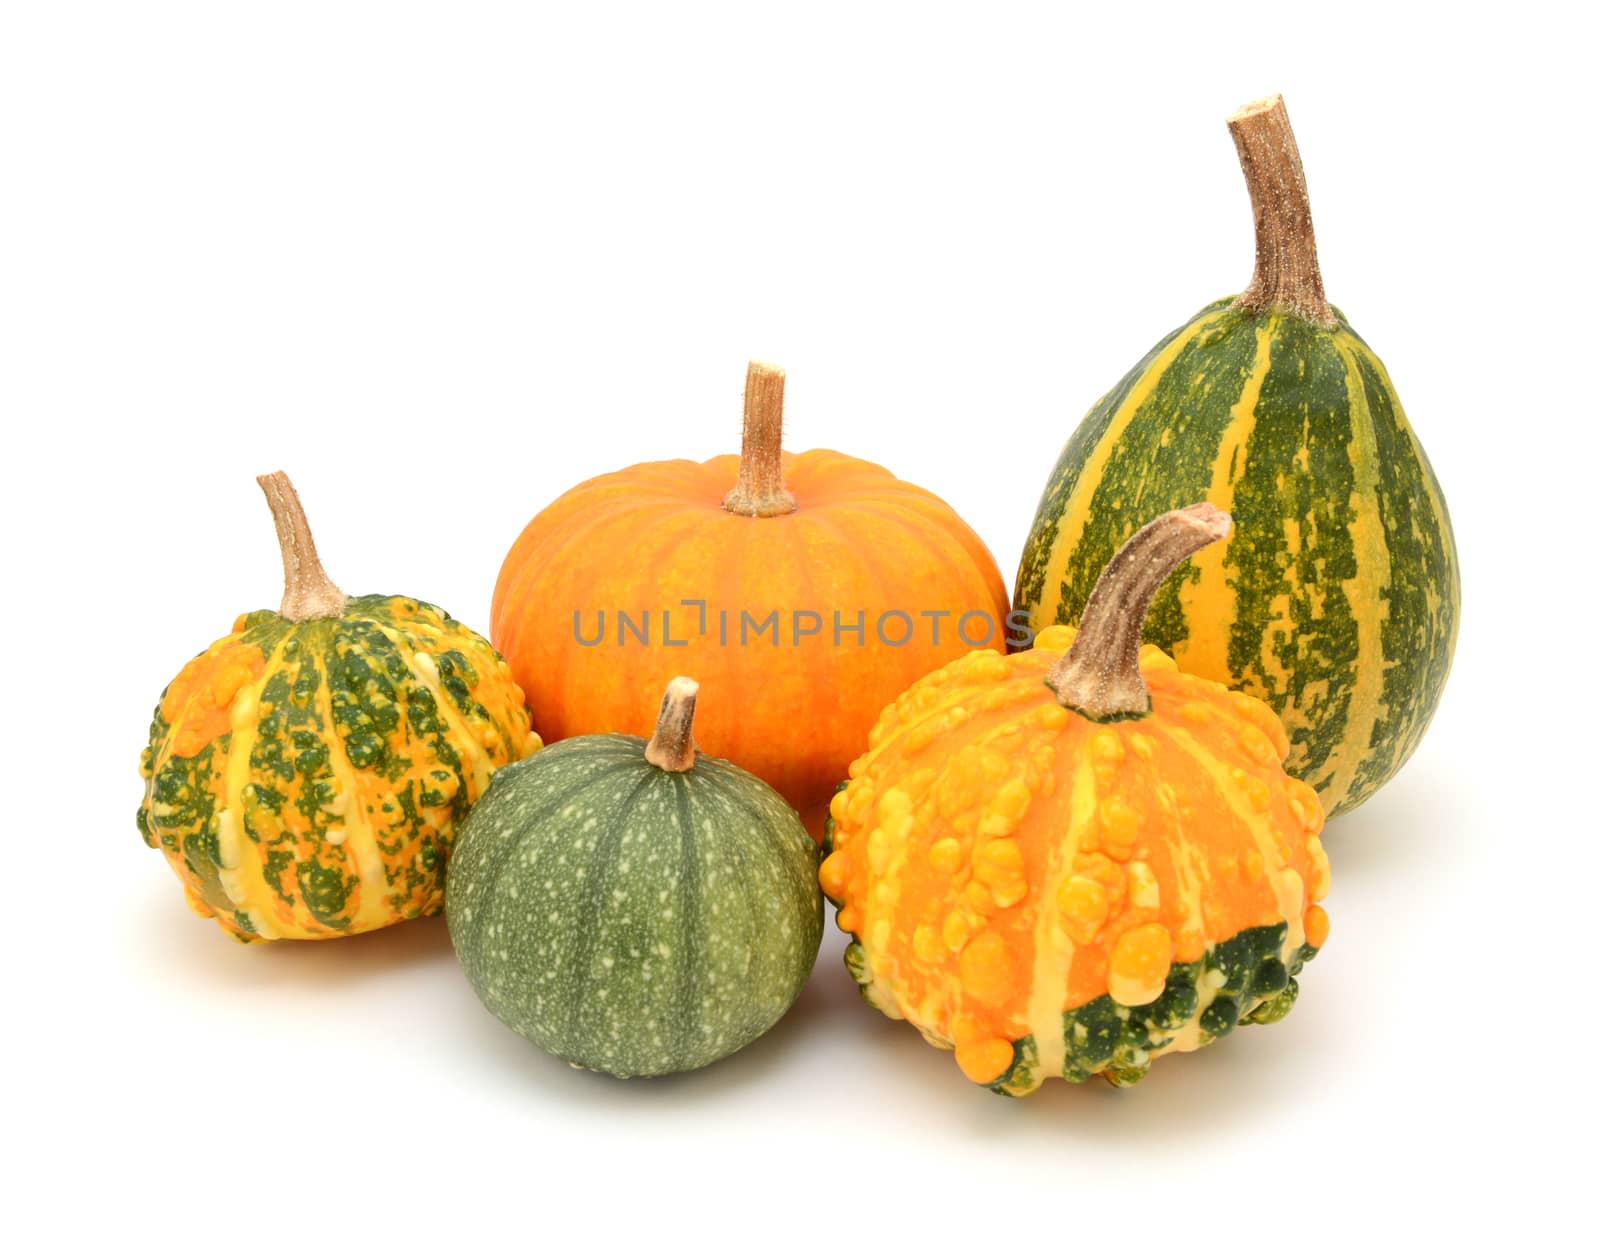 Group of decorative gourds with orange and green markings for fall decoration, on a white background